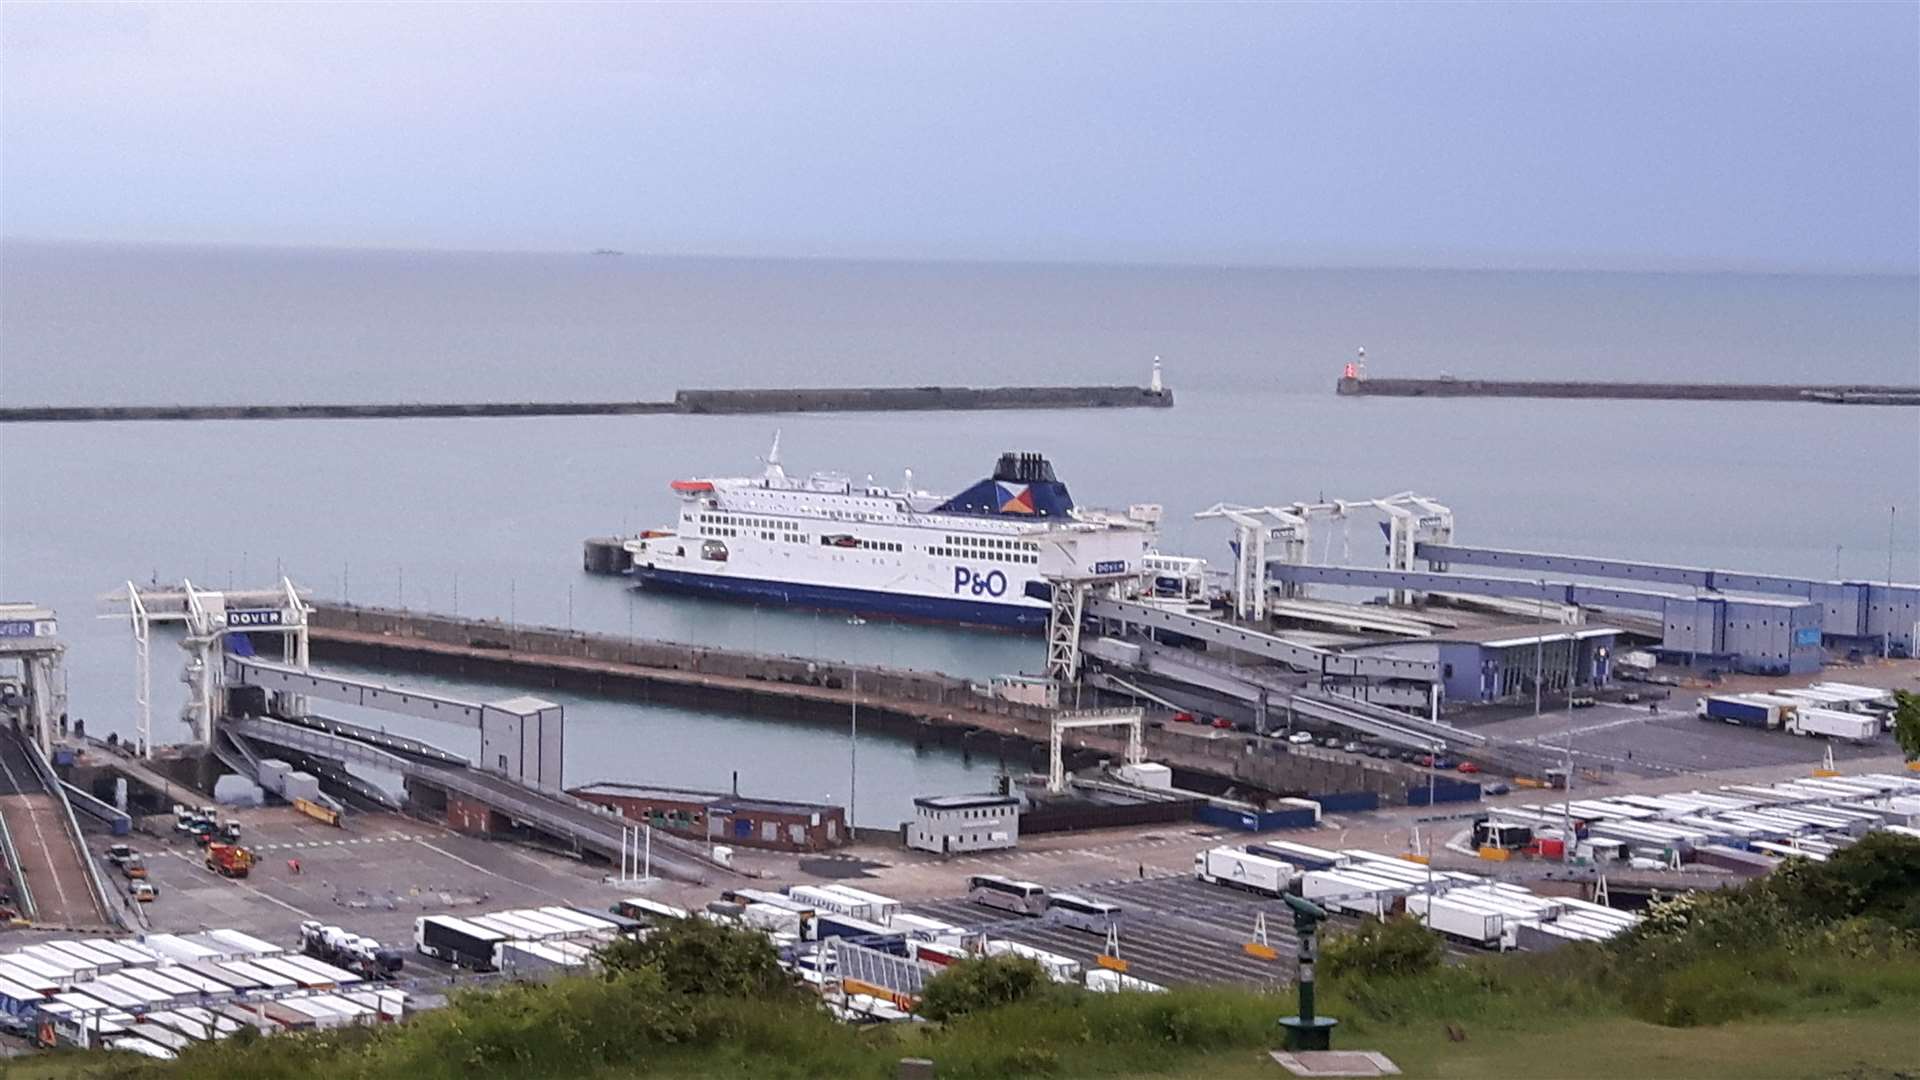 The Port of Dover says it is "prepared" for Brexit